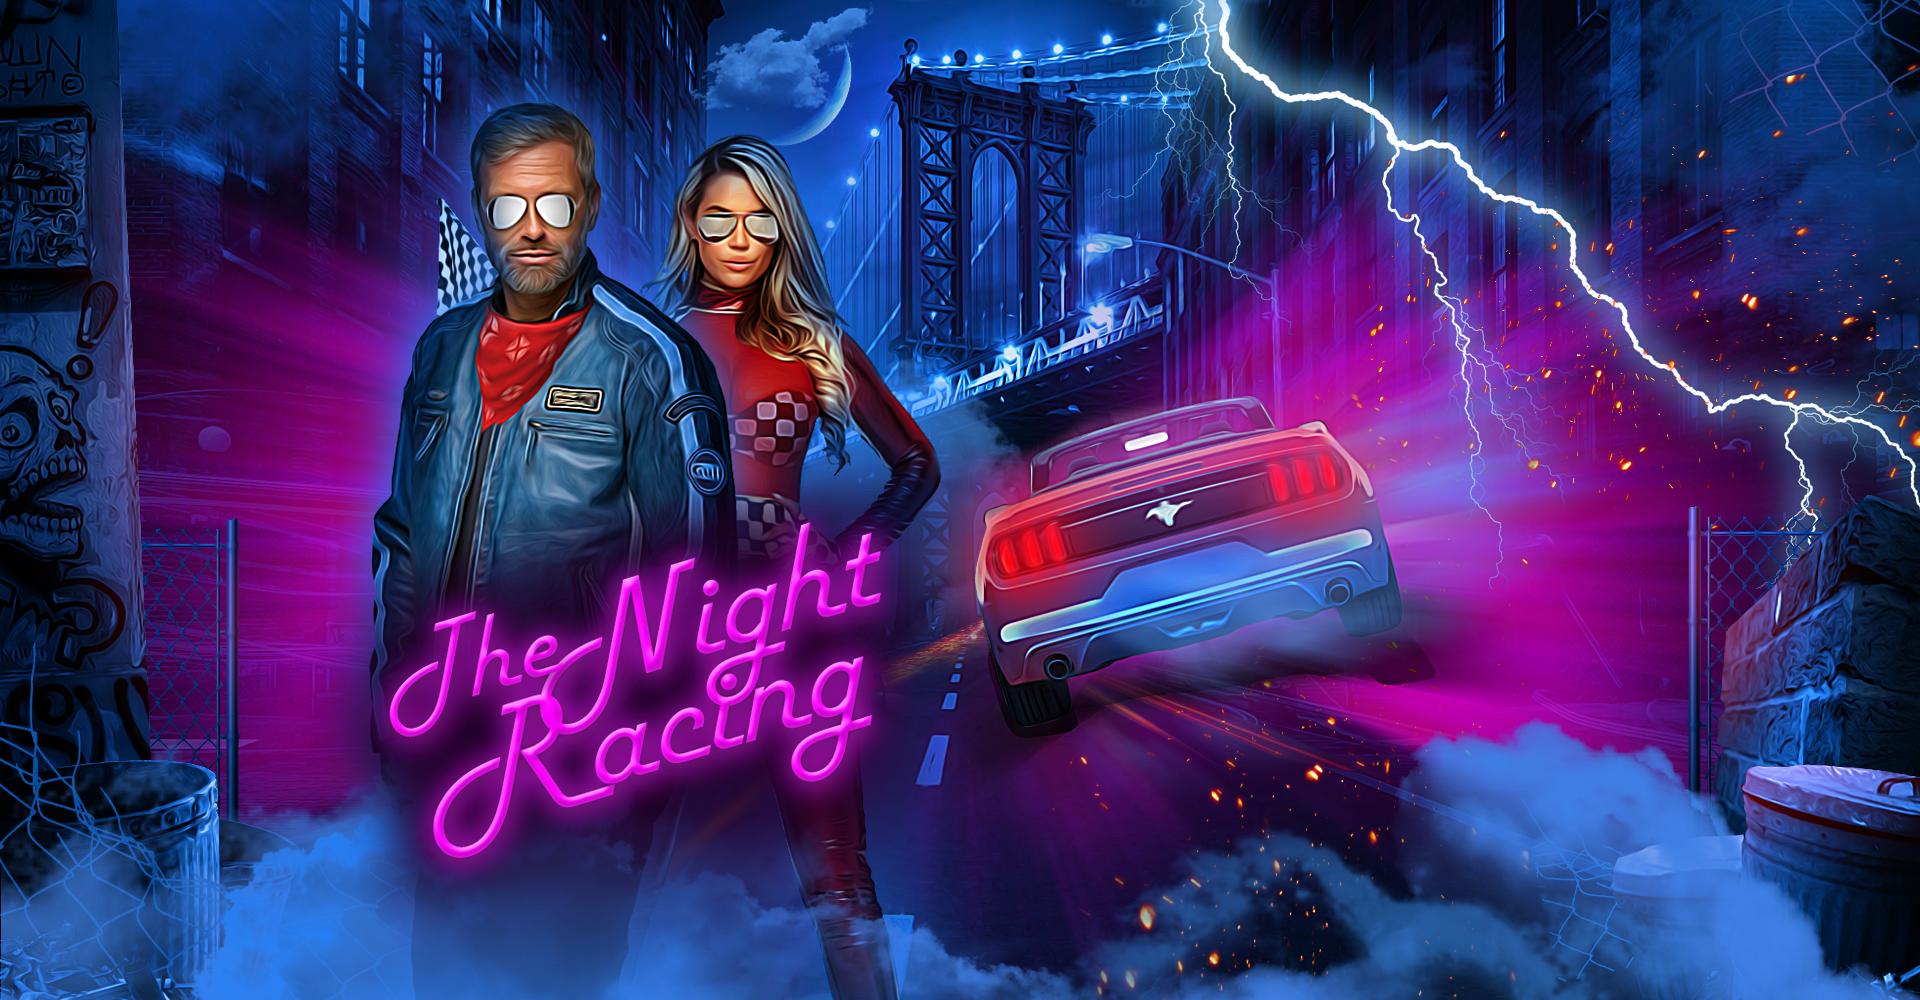 The Night Racing | Promotion pack | Online slot